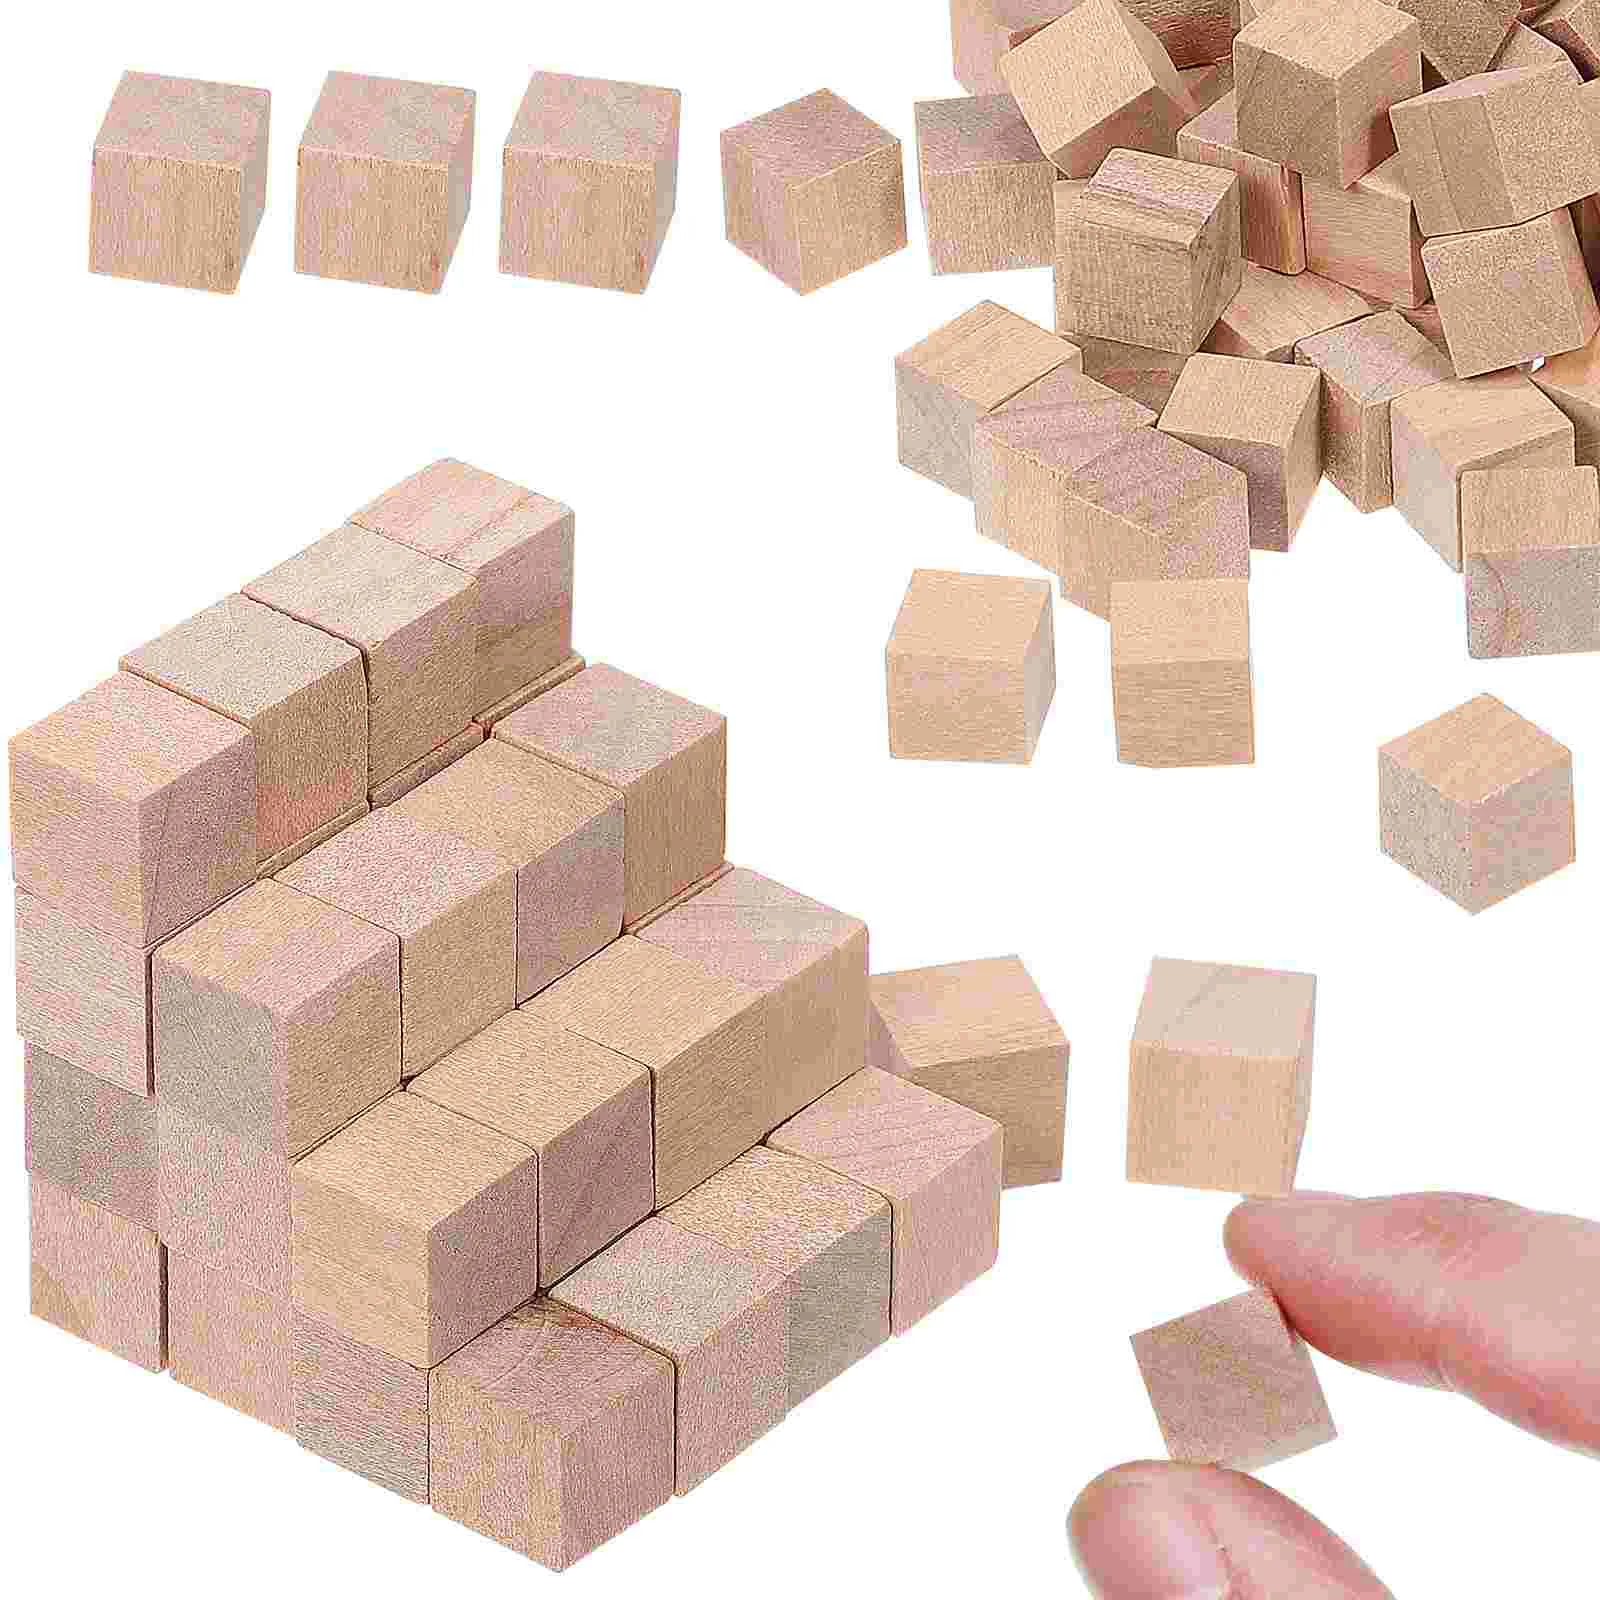 

Wooden Blocks Unfinished Wooden Cubes Square Blocks Educational Craft Cubes Lotus cube building blocks